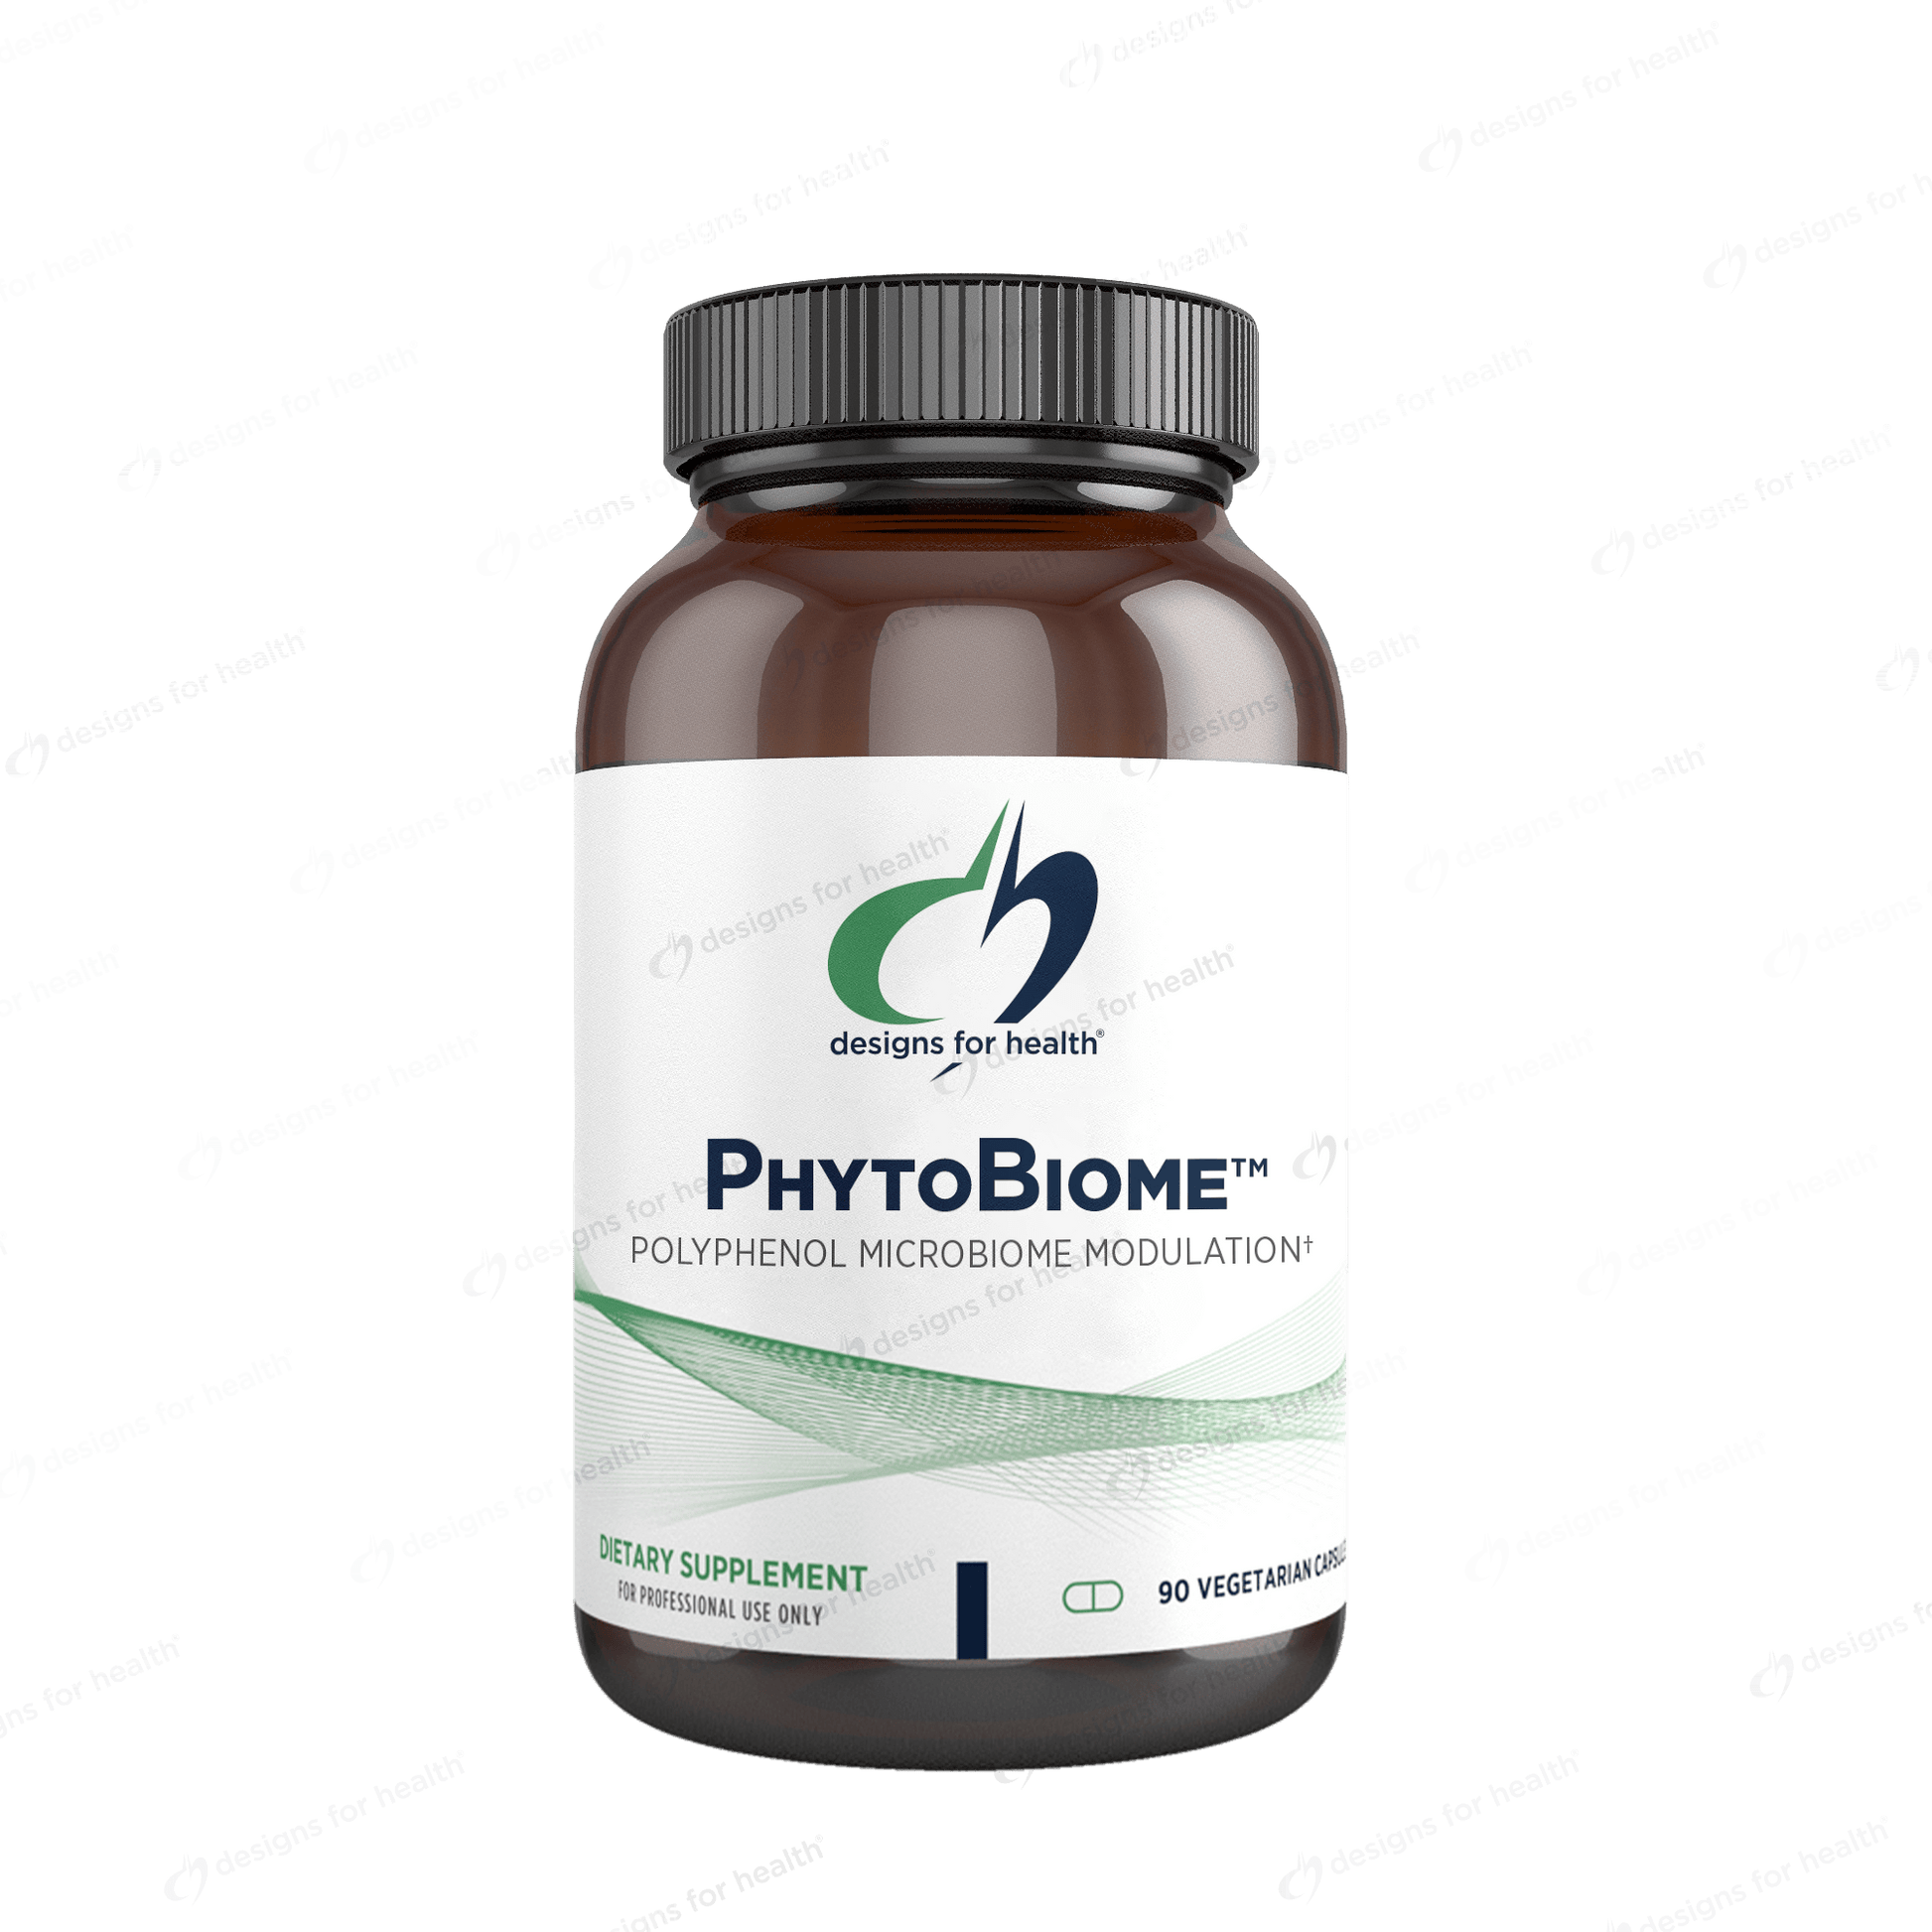 Designs for Health Phytobiome capsules